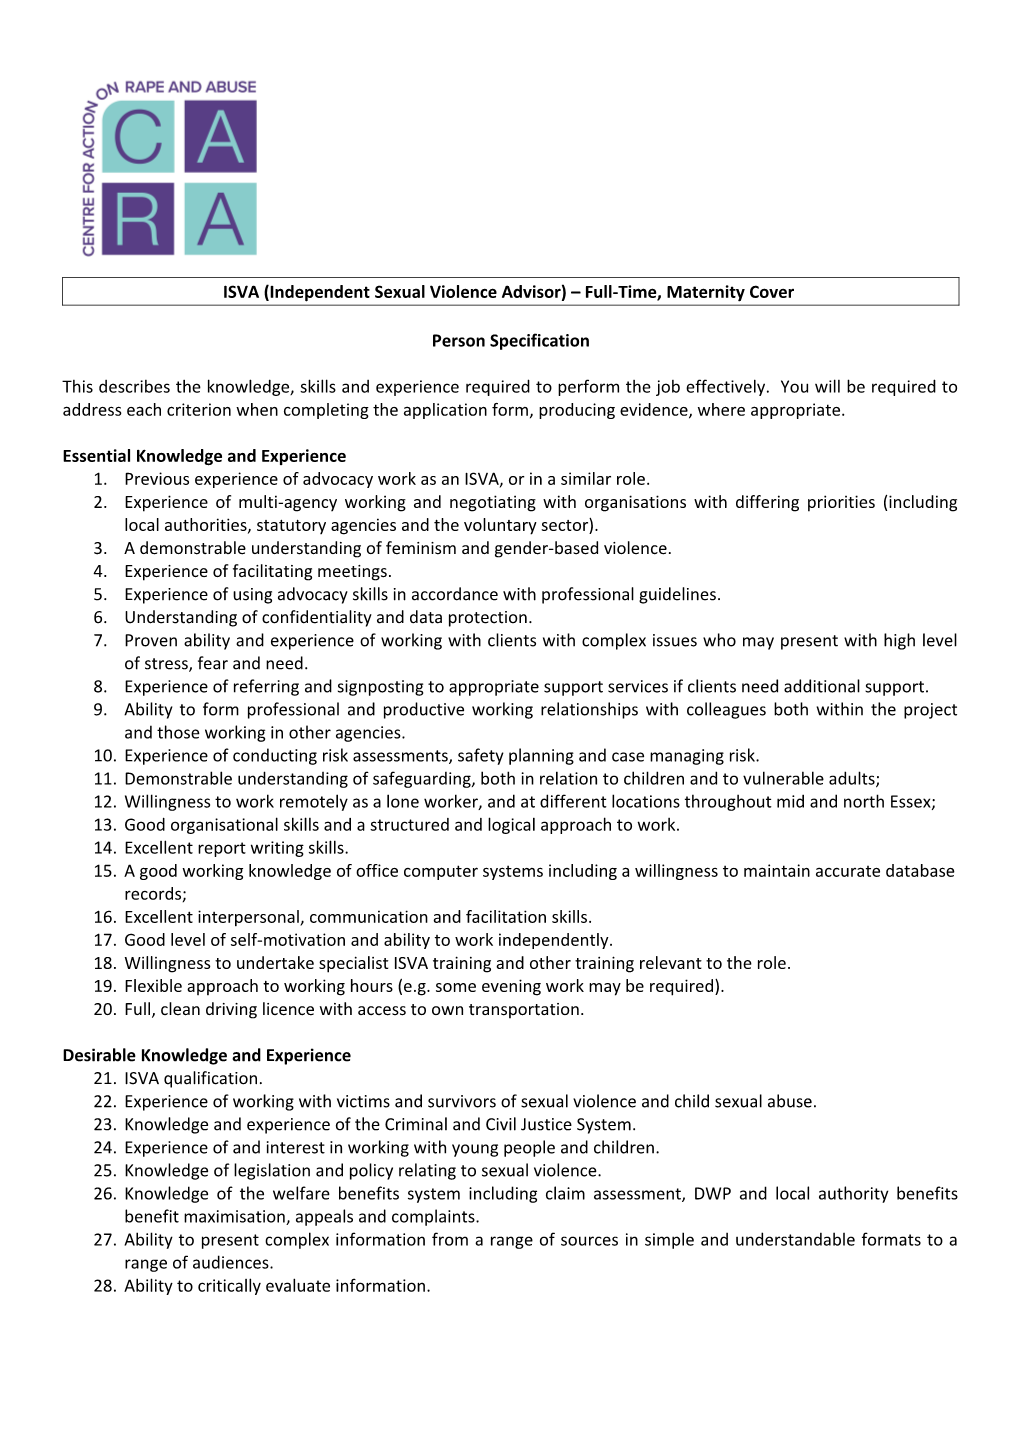 ISVA (Independent Sexual Violence Advisor) Full-Time, Maternity Cover